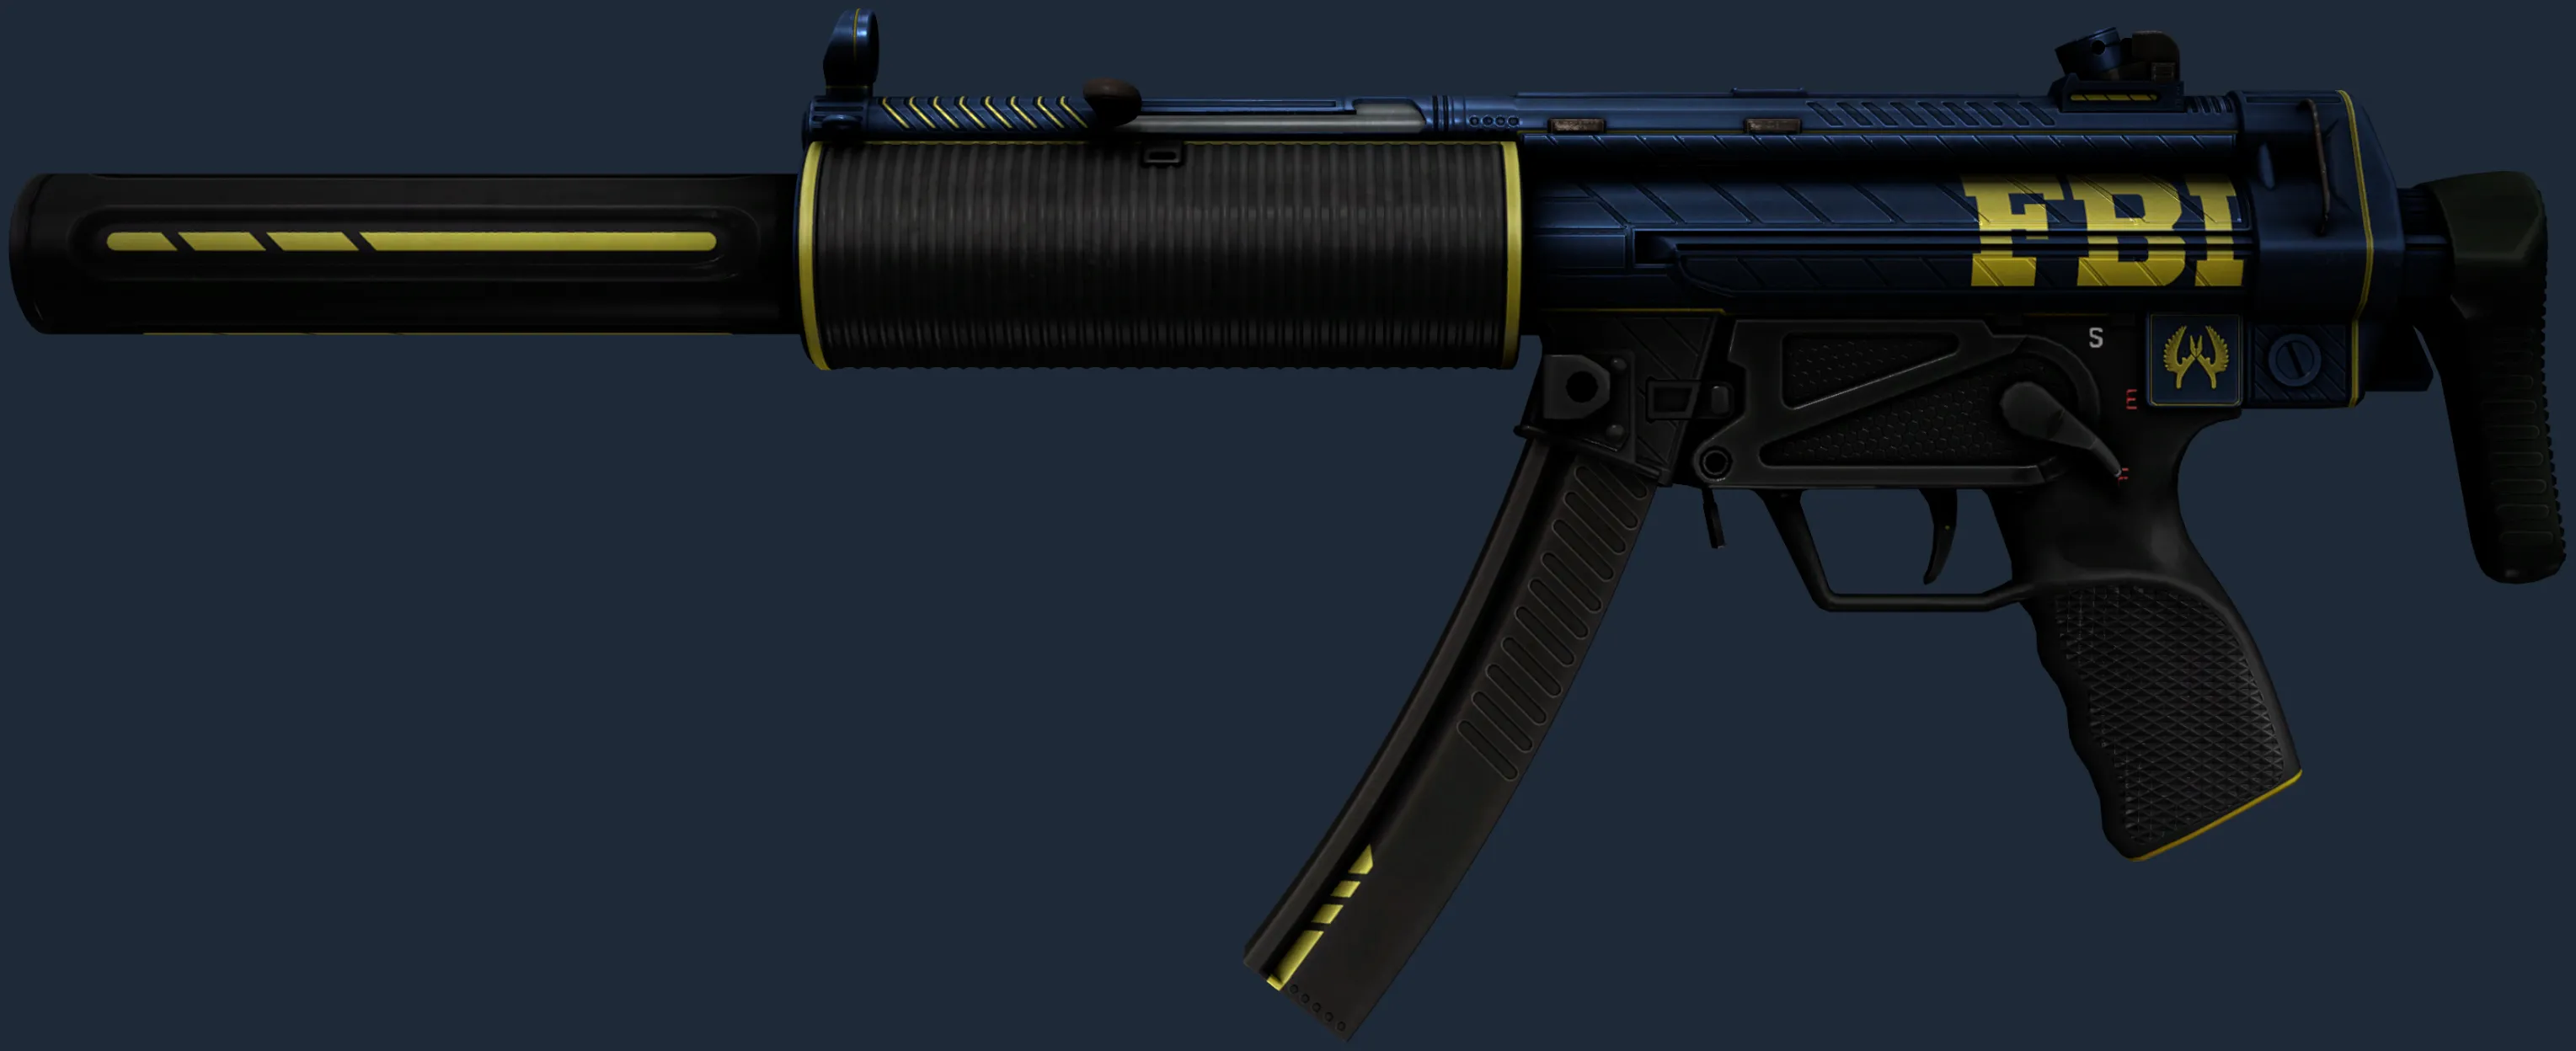 MP5-SD | Agent (Factory New)